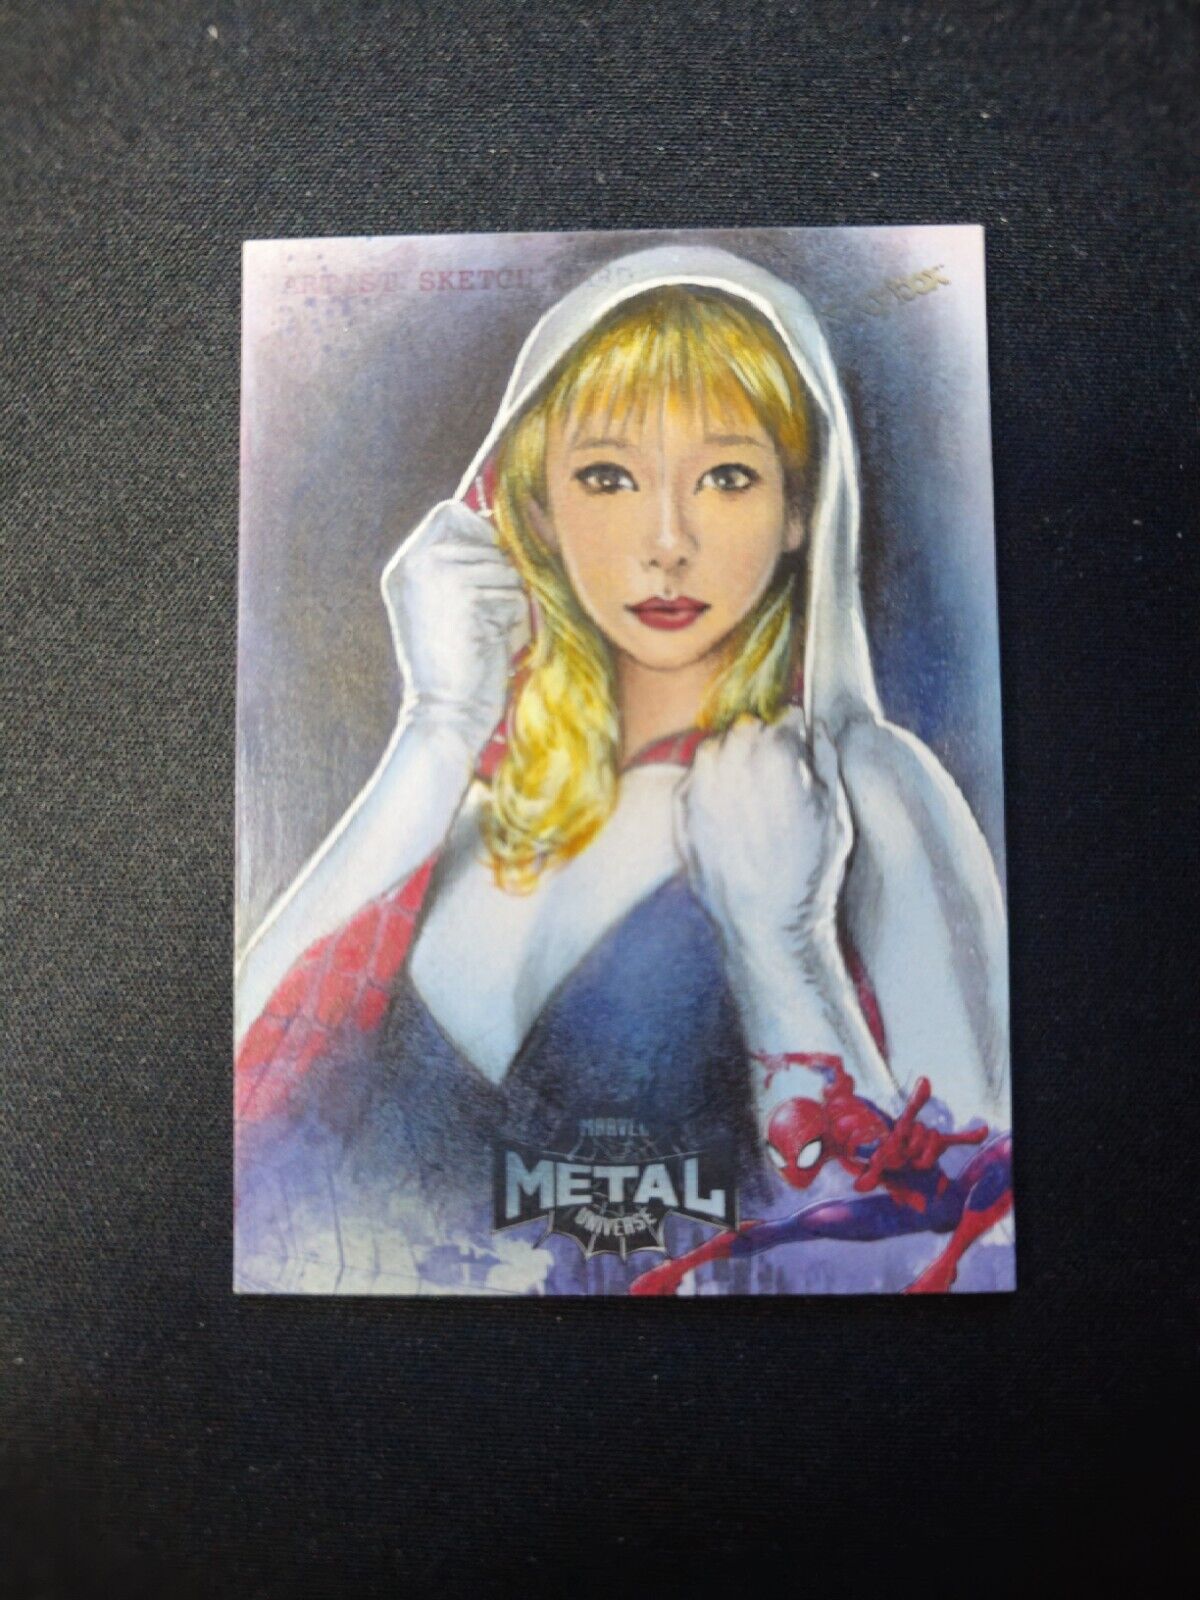 2021 Skybox Marvel Metal Universe 1/1 Gwen Stacy Sketch Card By  Huy Truong